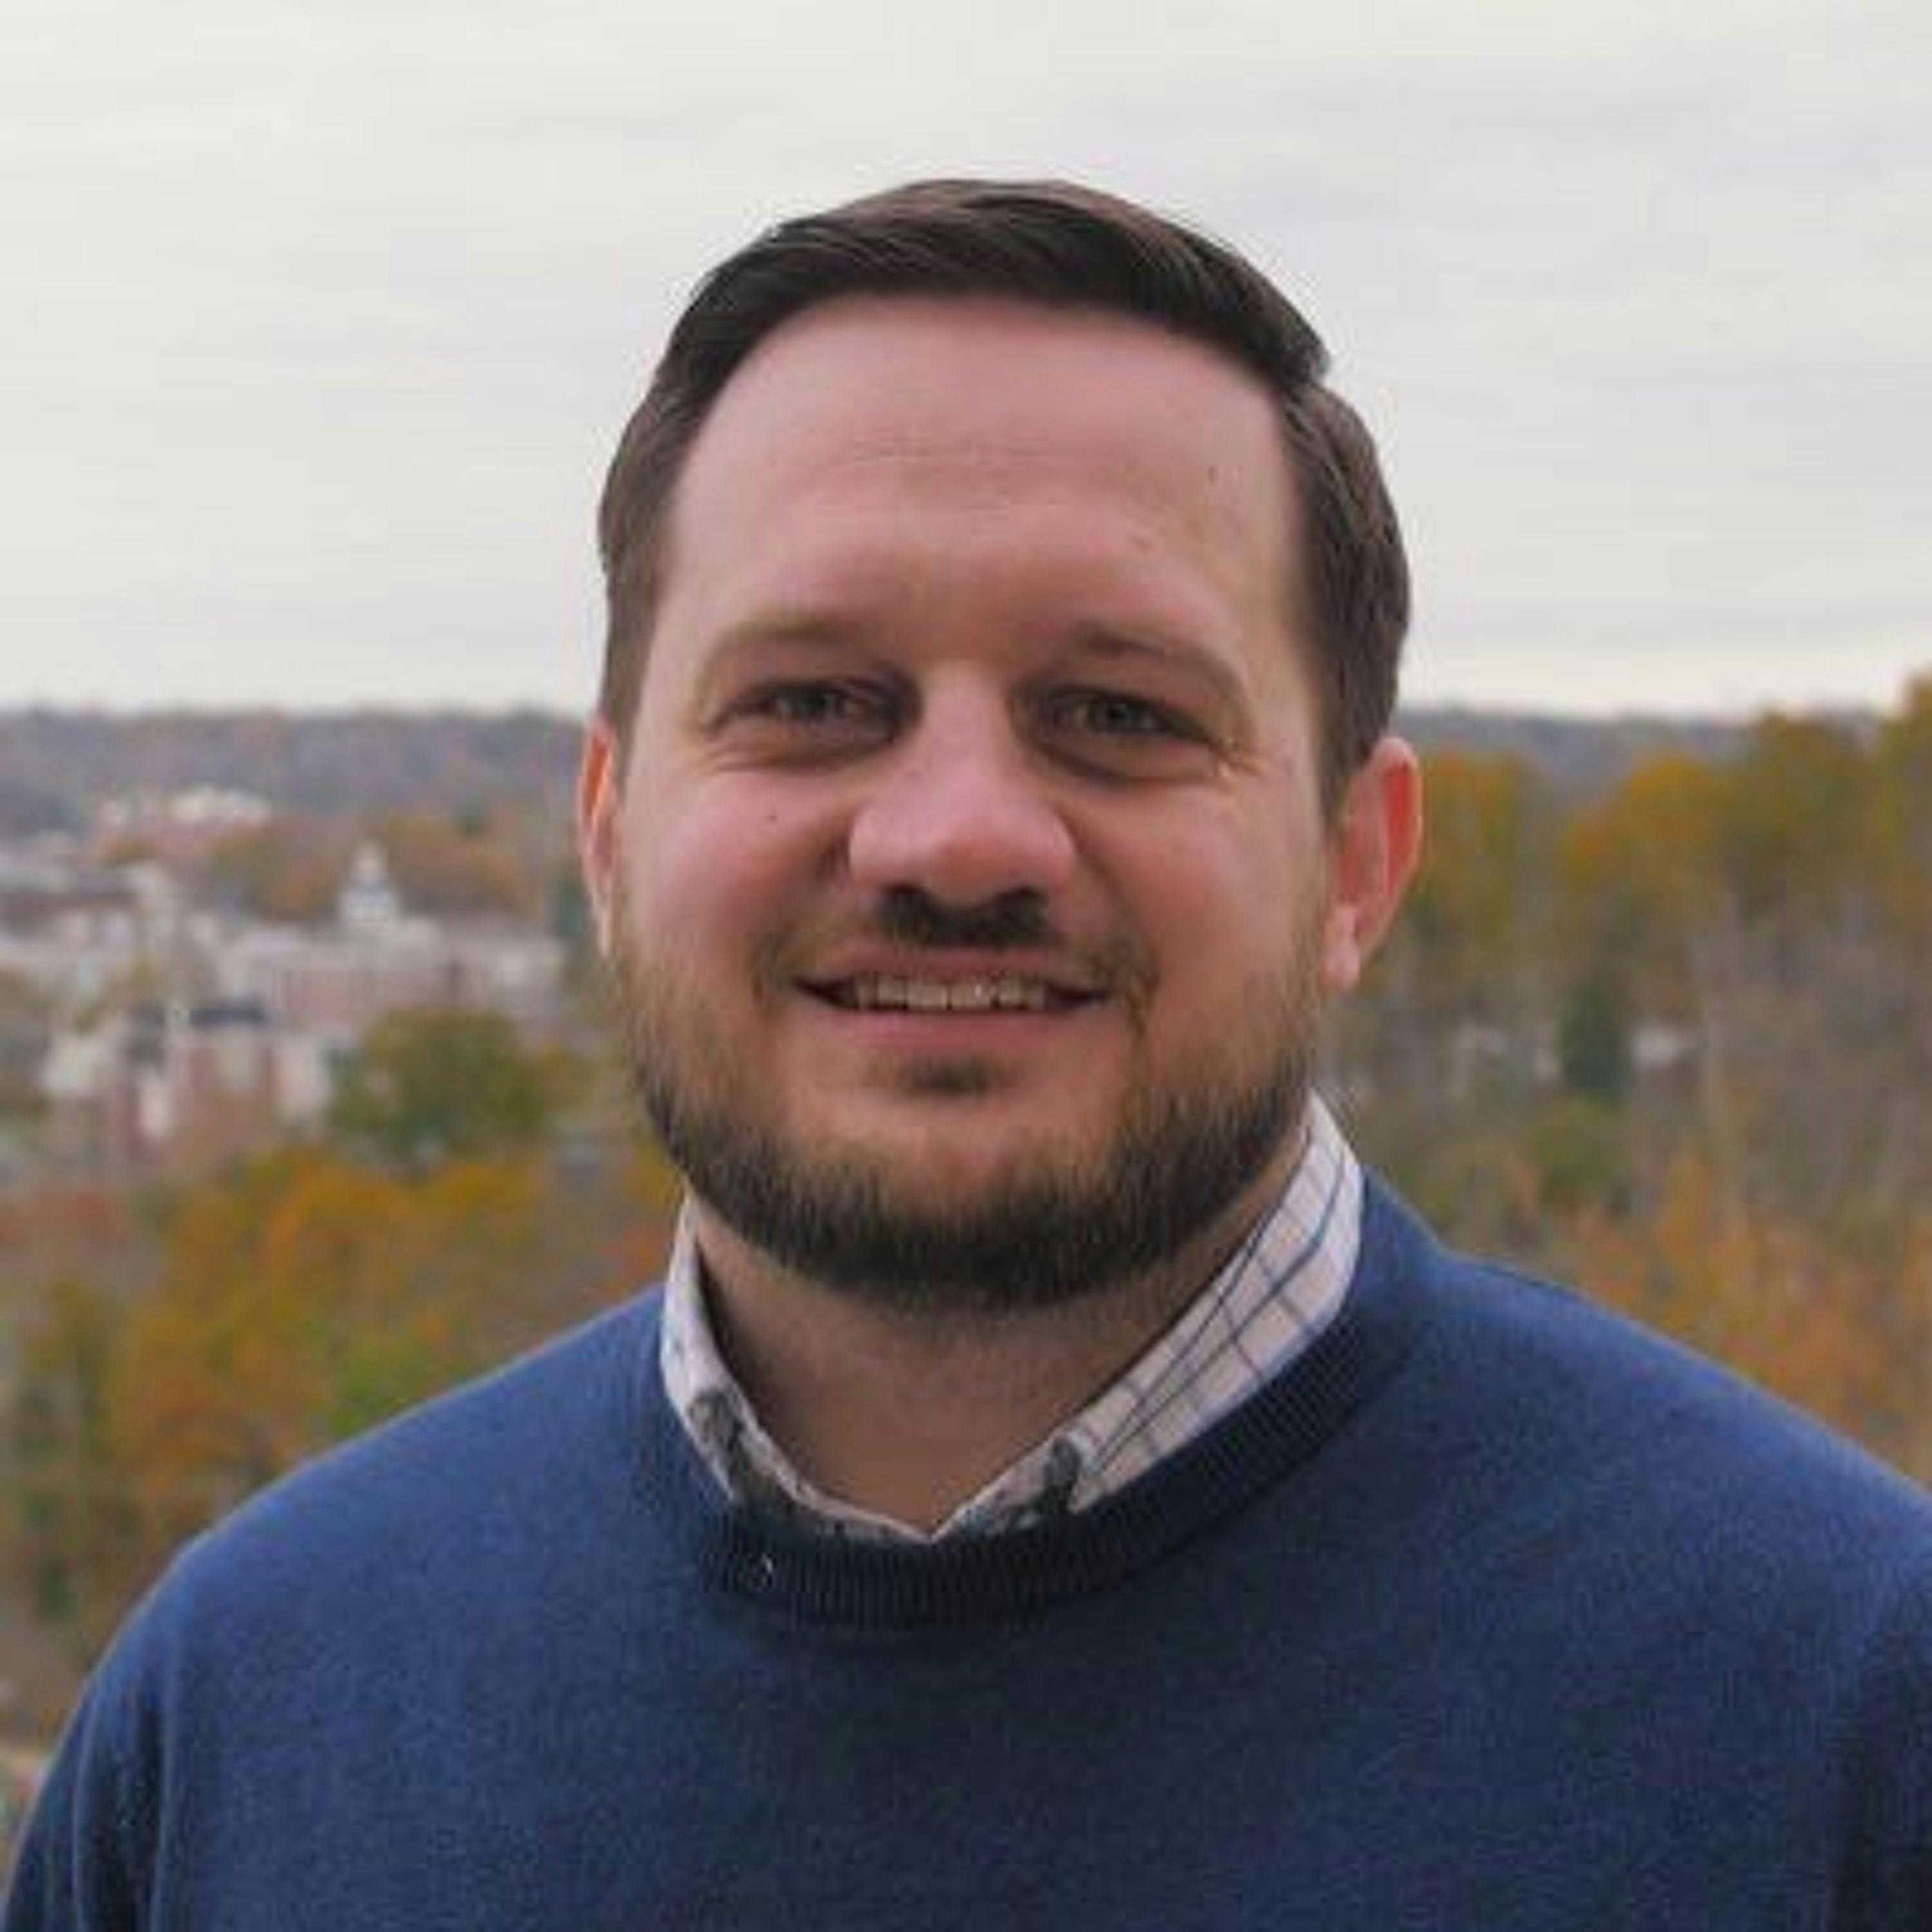 2020 Candidate Series: Joel Newby for Congress (OH-15)